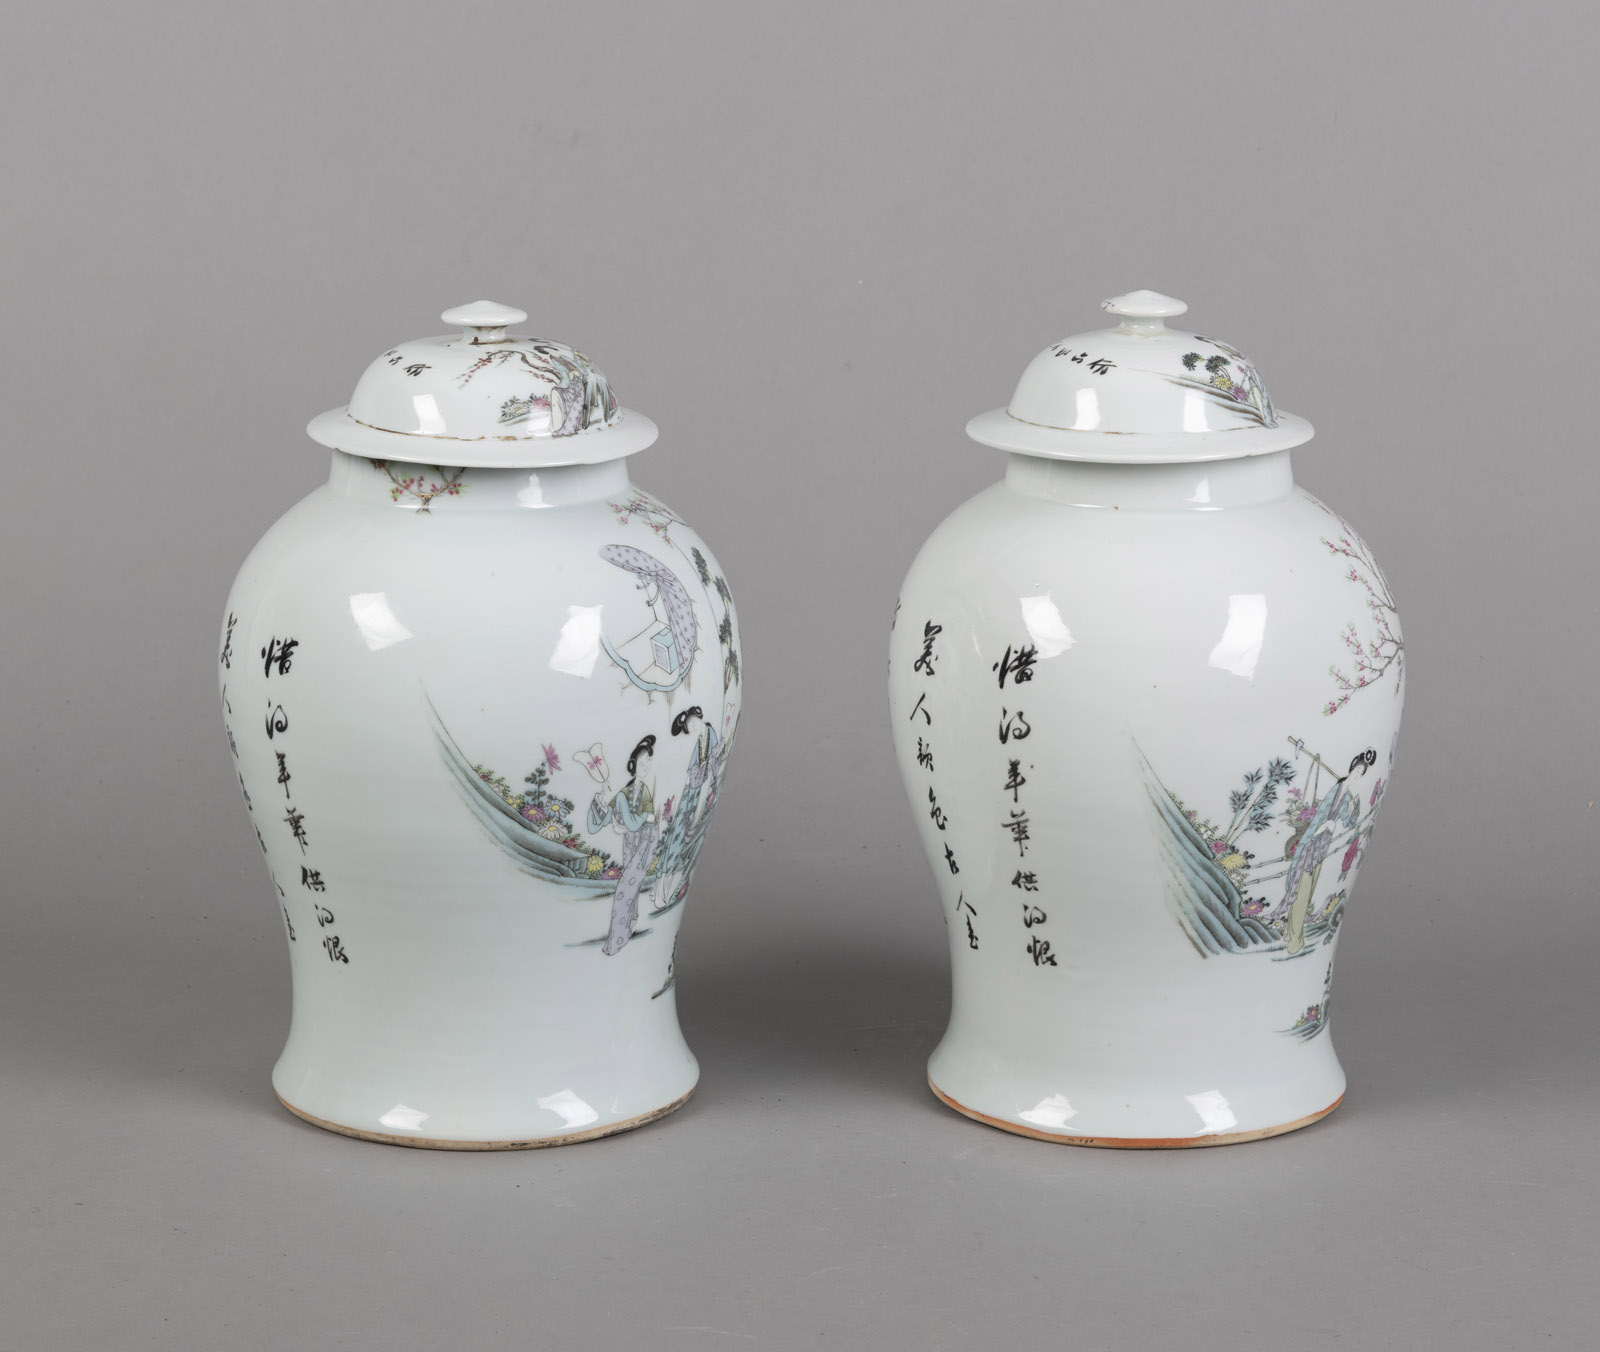 A PAIR OF INSCRIBED 'QIANJIANGCAI' FIGURAL PORCELAIN VASES WITH COVERS - Image 2 of 4